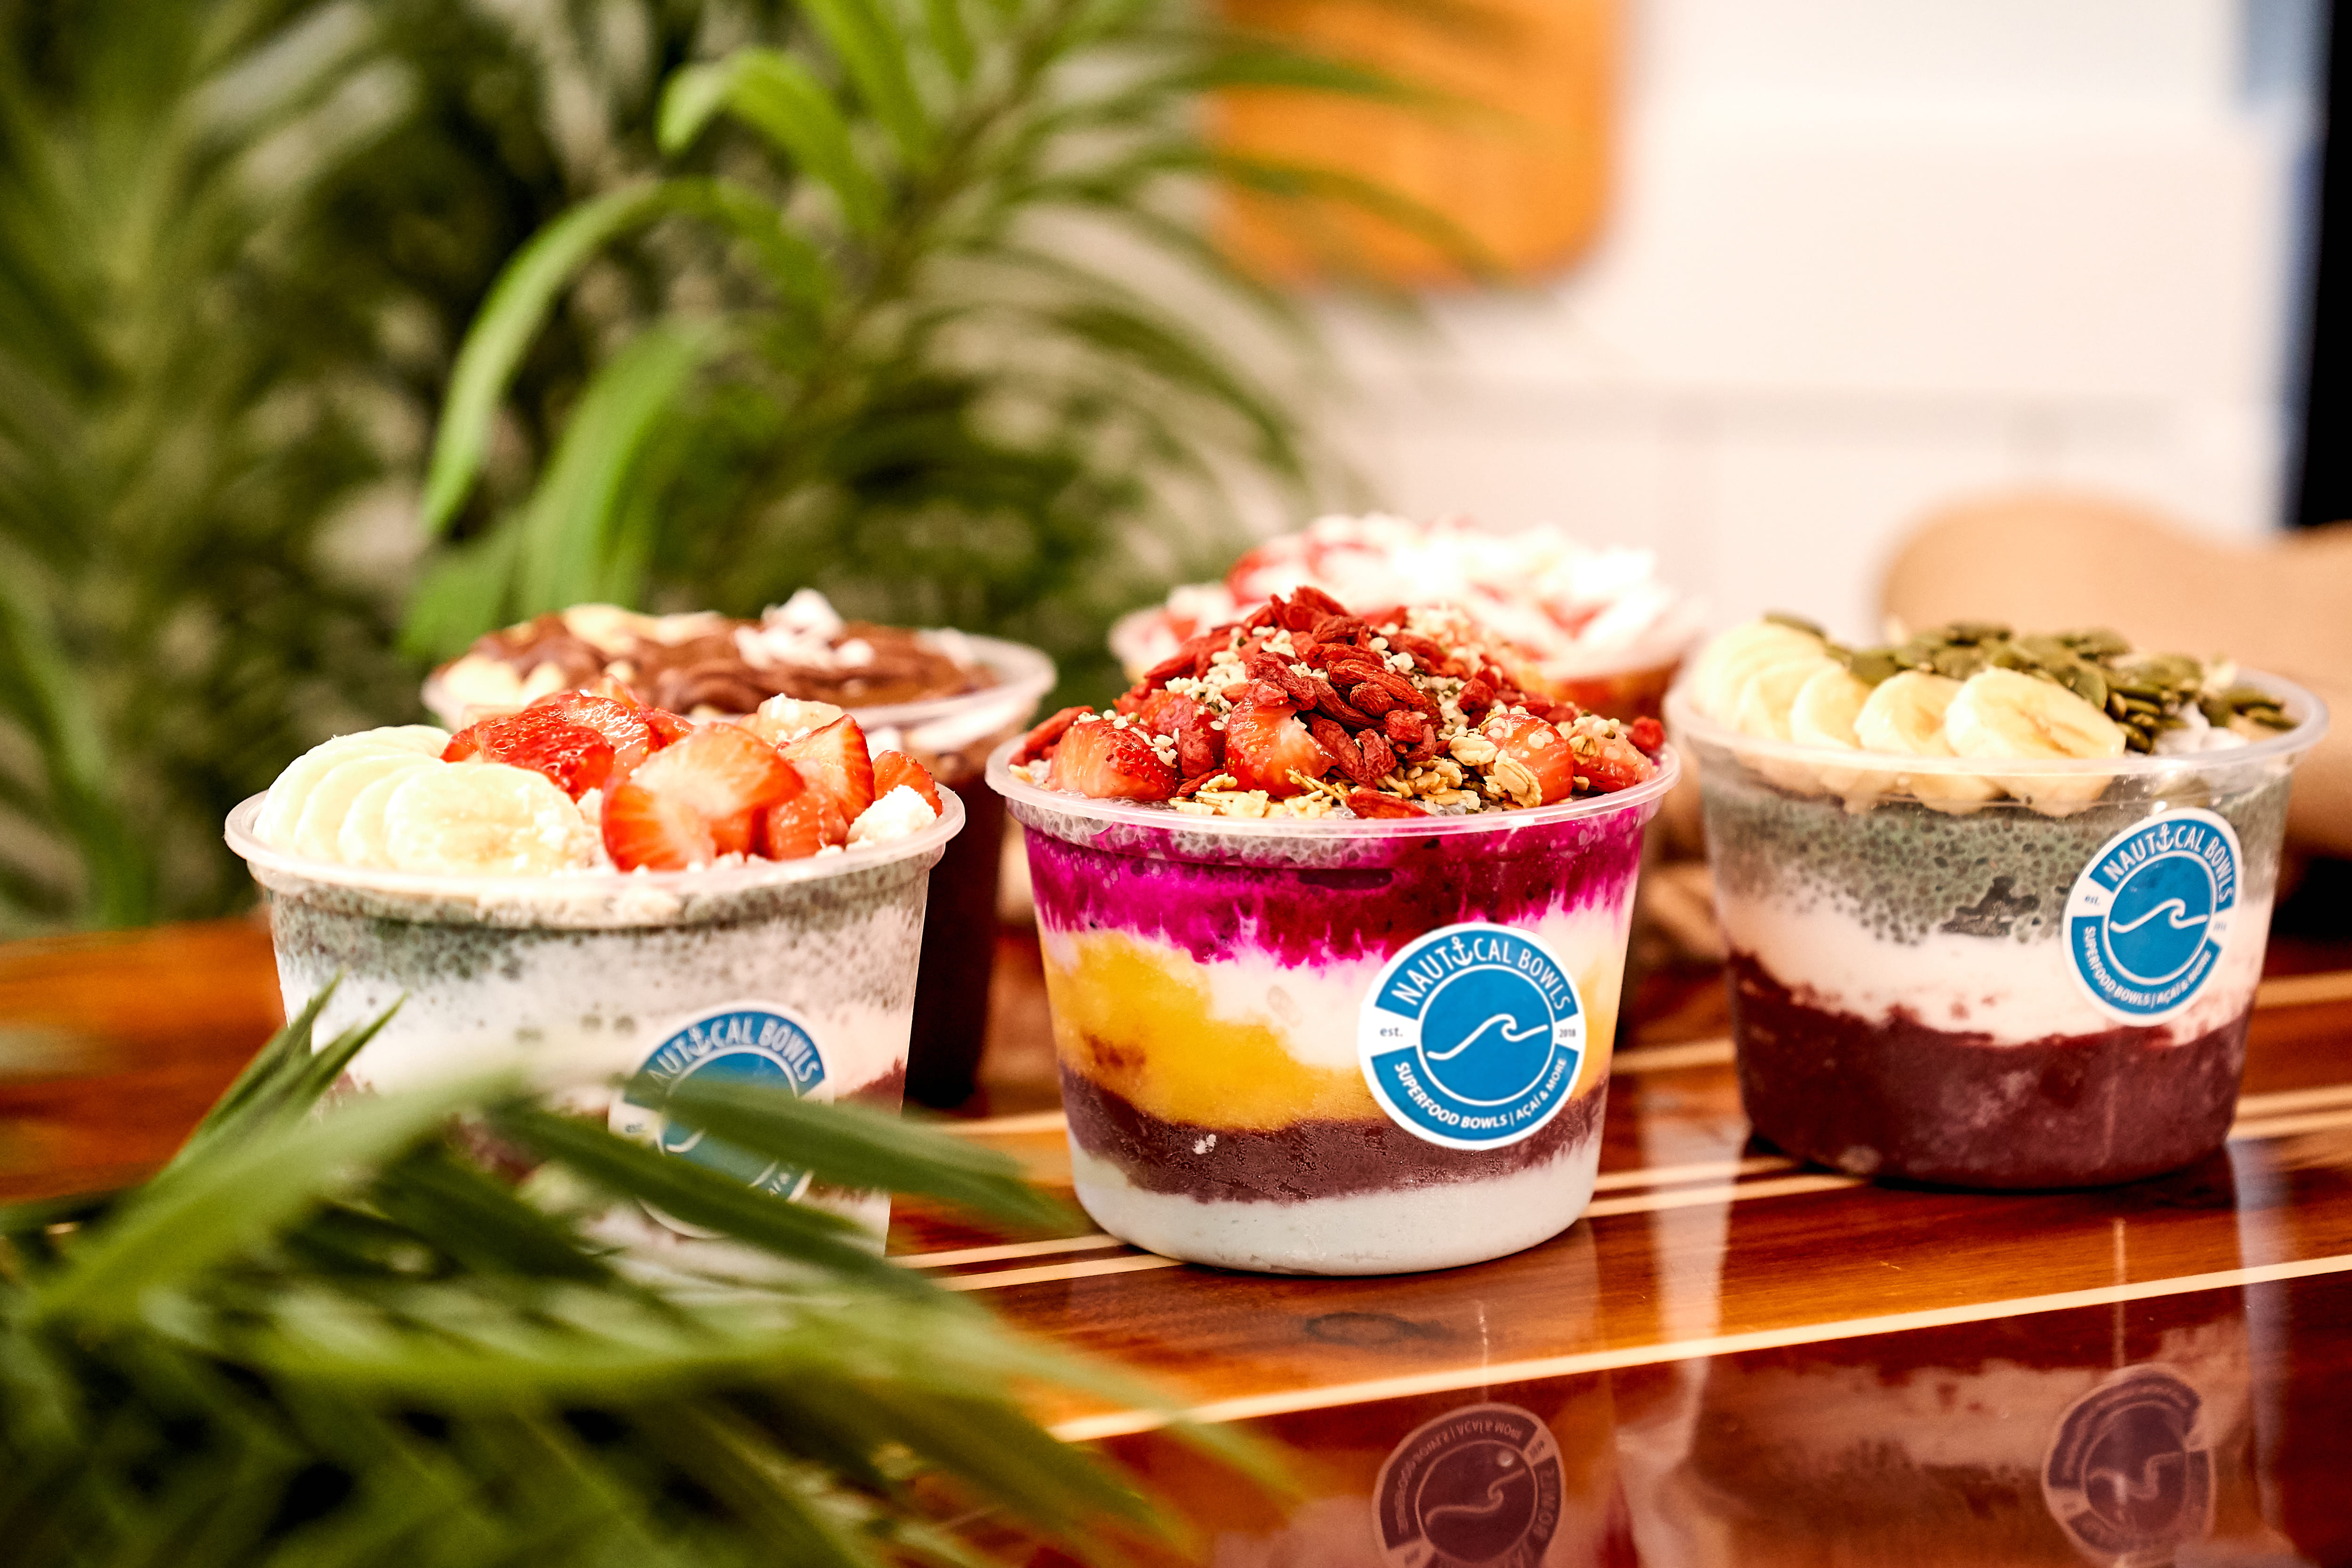 Create your perfect meal with our 'Build Your Own Bowl'! Choose from a variety of healthy options including crunchy granola, fresh fruits, tasty dry toppings, delicious drizzles, & protein-packed add-ons. Tailor your bowl to suit your taste & nutritional needs for a truly personalized dining experience!